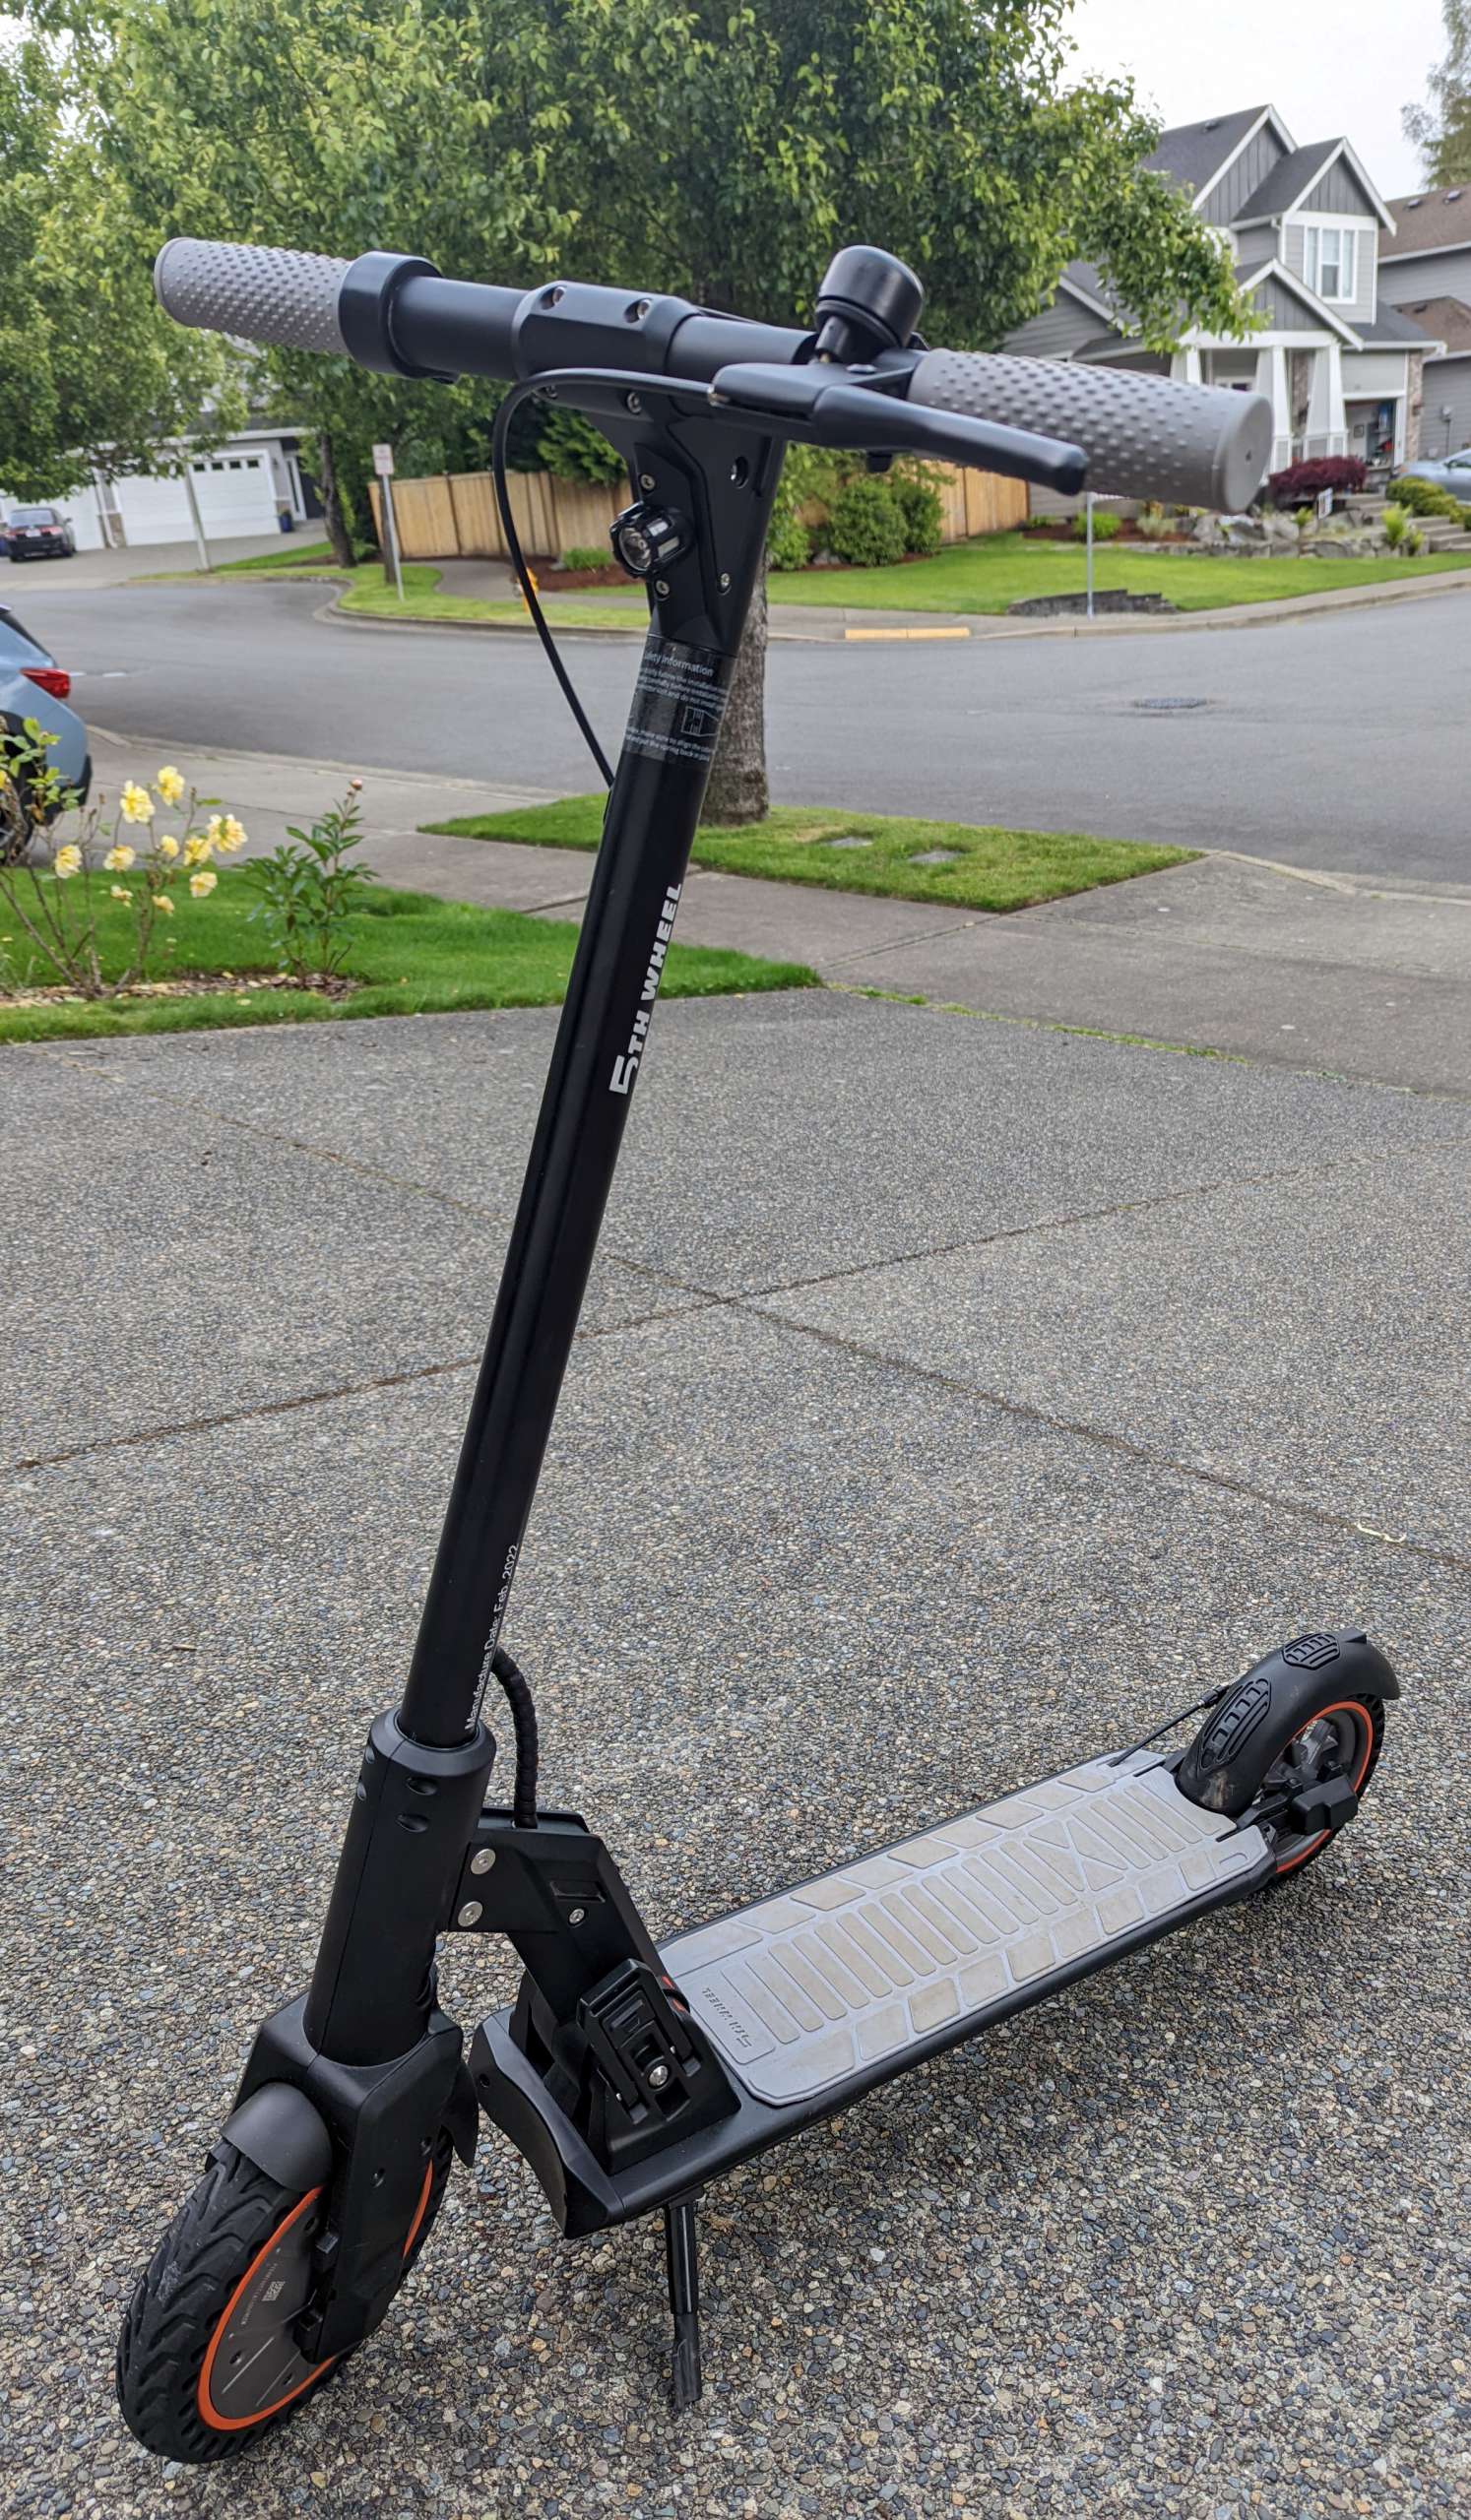 5TH WHEEL M1 Electric Scooter